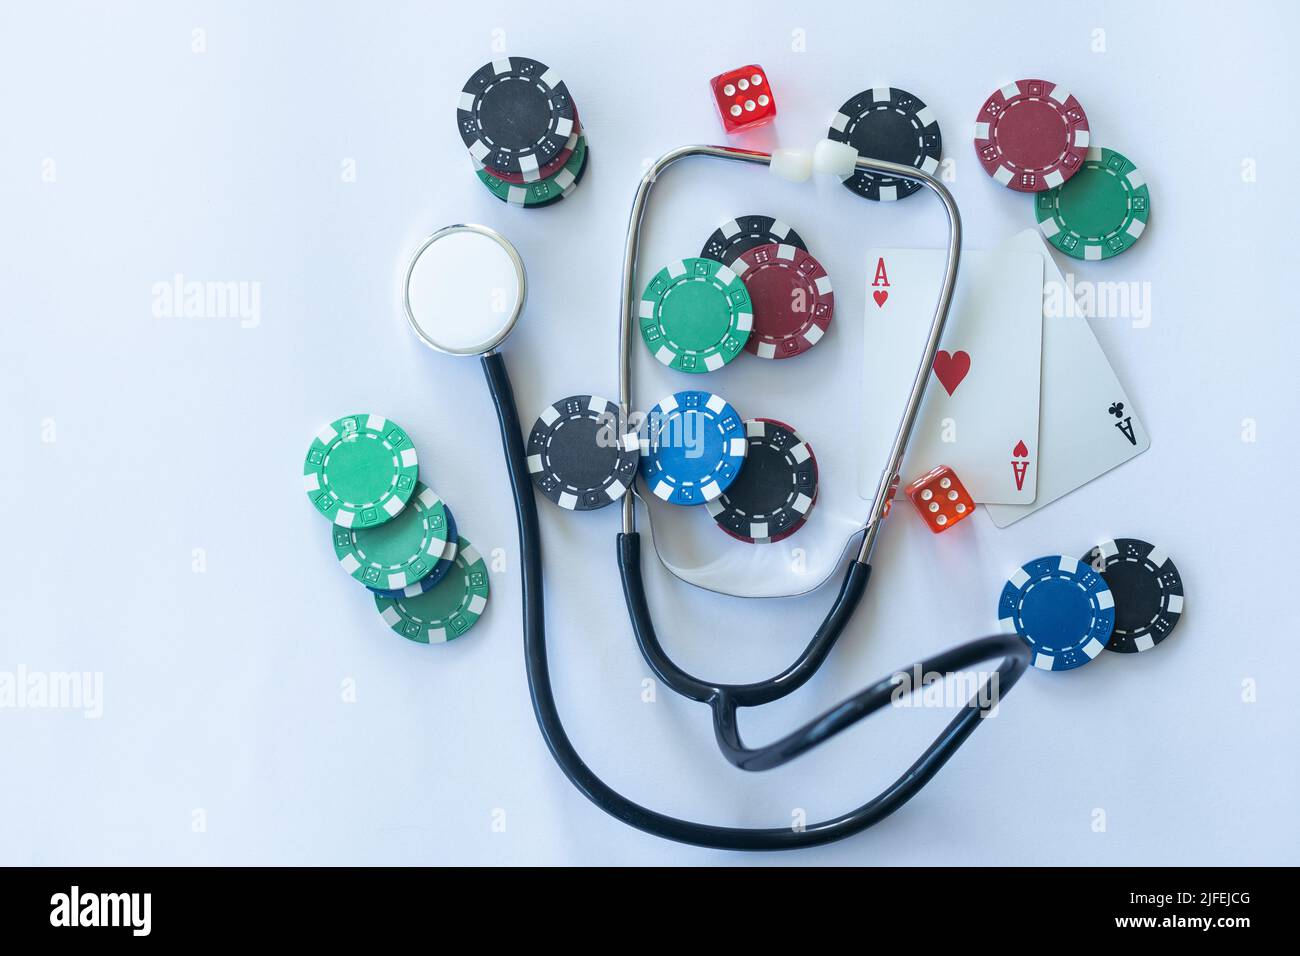 Medical risk concept, stethoscope with poker chip Stock Photo